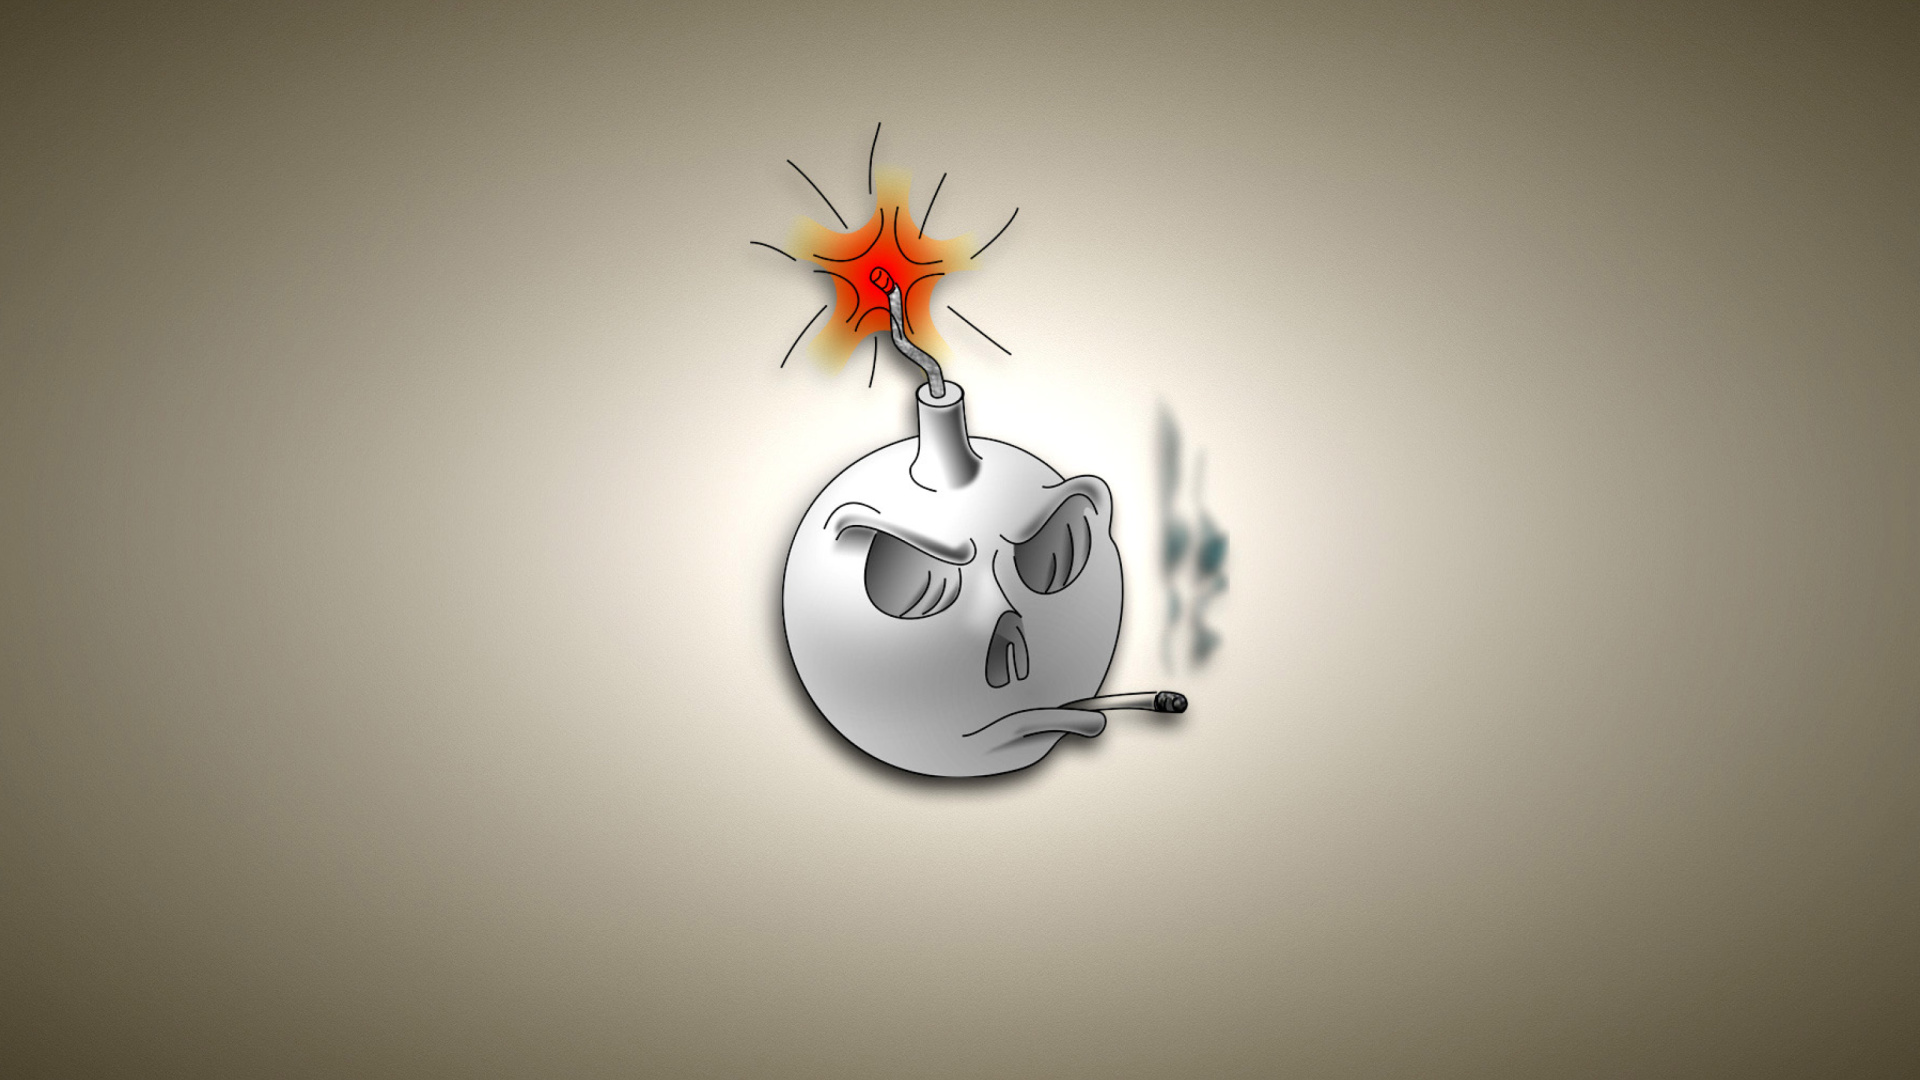 Bomb with Wick wallpaper 1920x1080